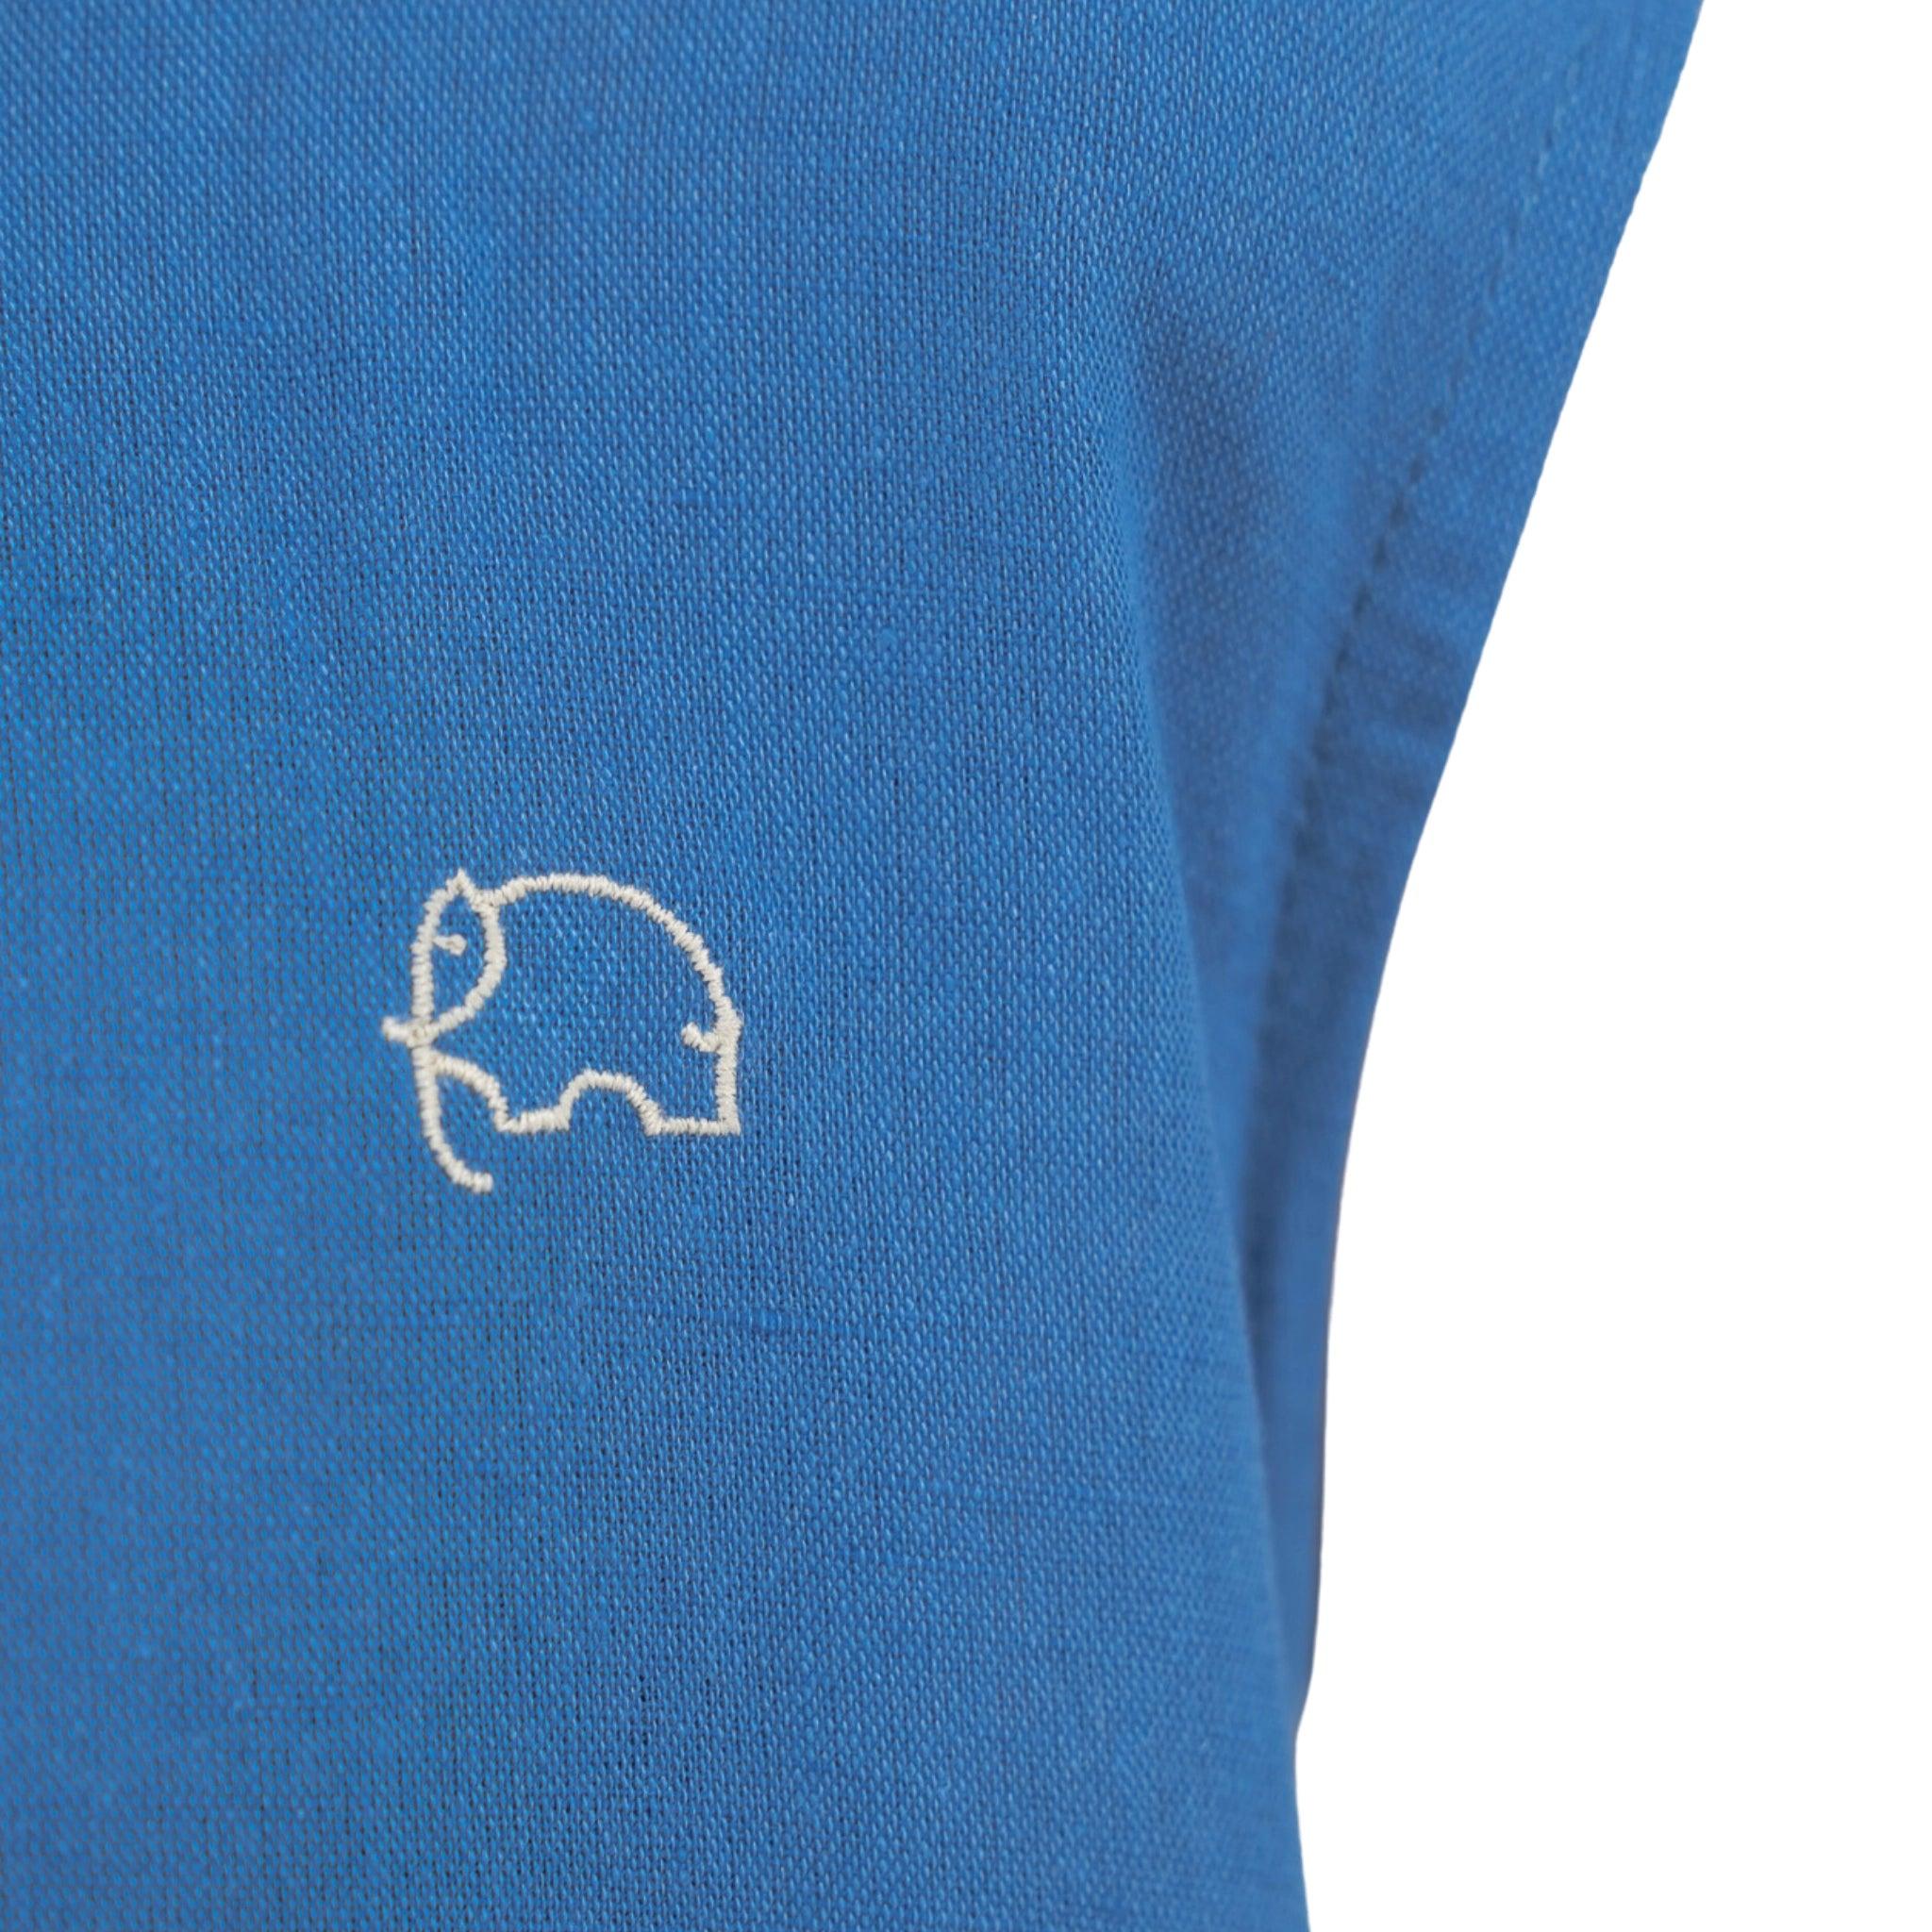 Close-up of a Karee linen cotton round neck frock for kids in Vallarta blue fabric with a small white embroidered logo of a stylized pig on the lower right corner.